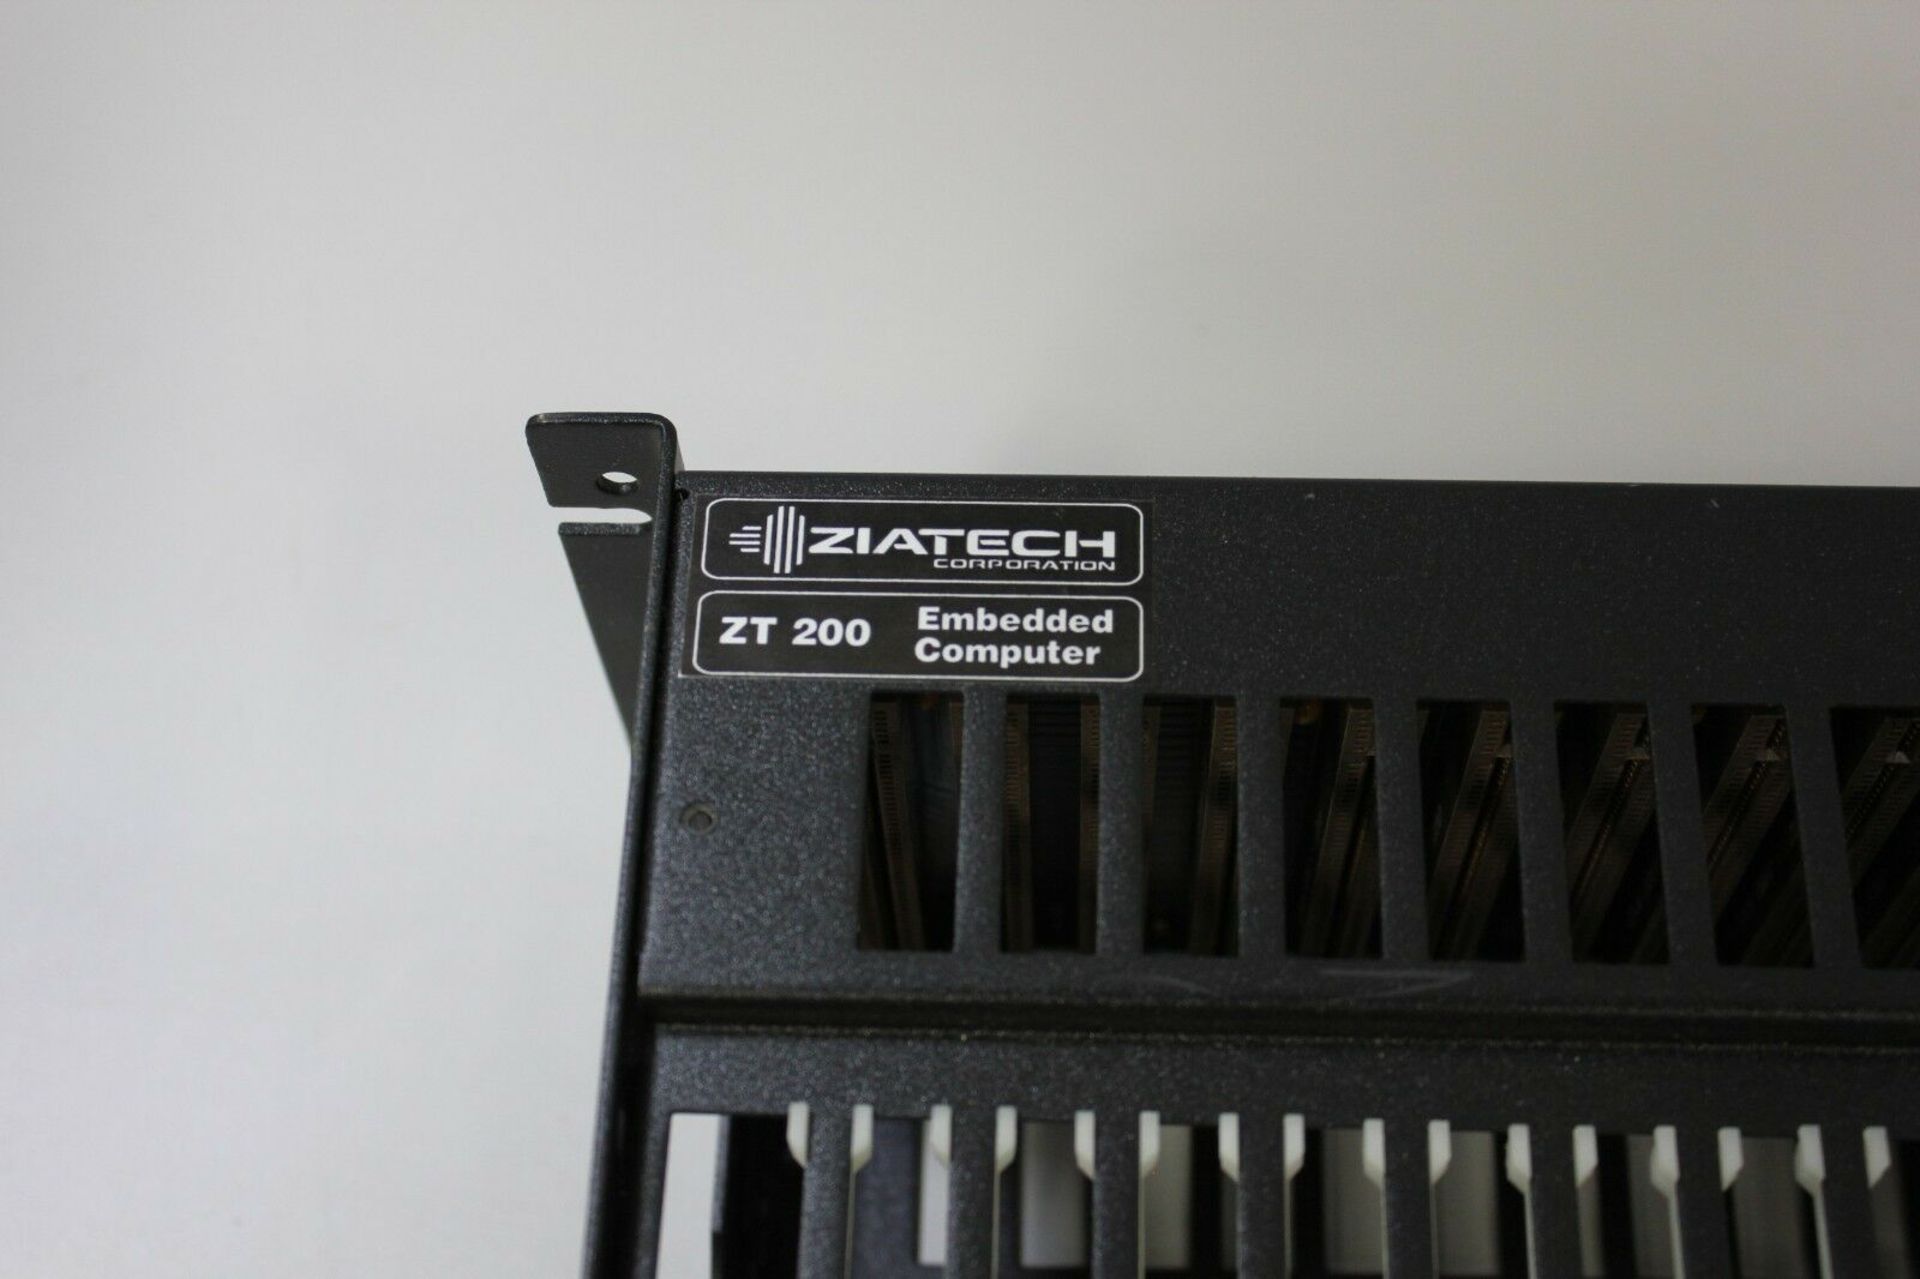 Ziatech 18 Slot STD Bus Embedded Computer Card Cage Backplane - Image 2 of 3